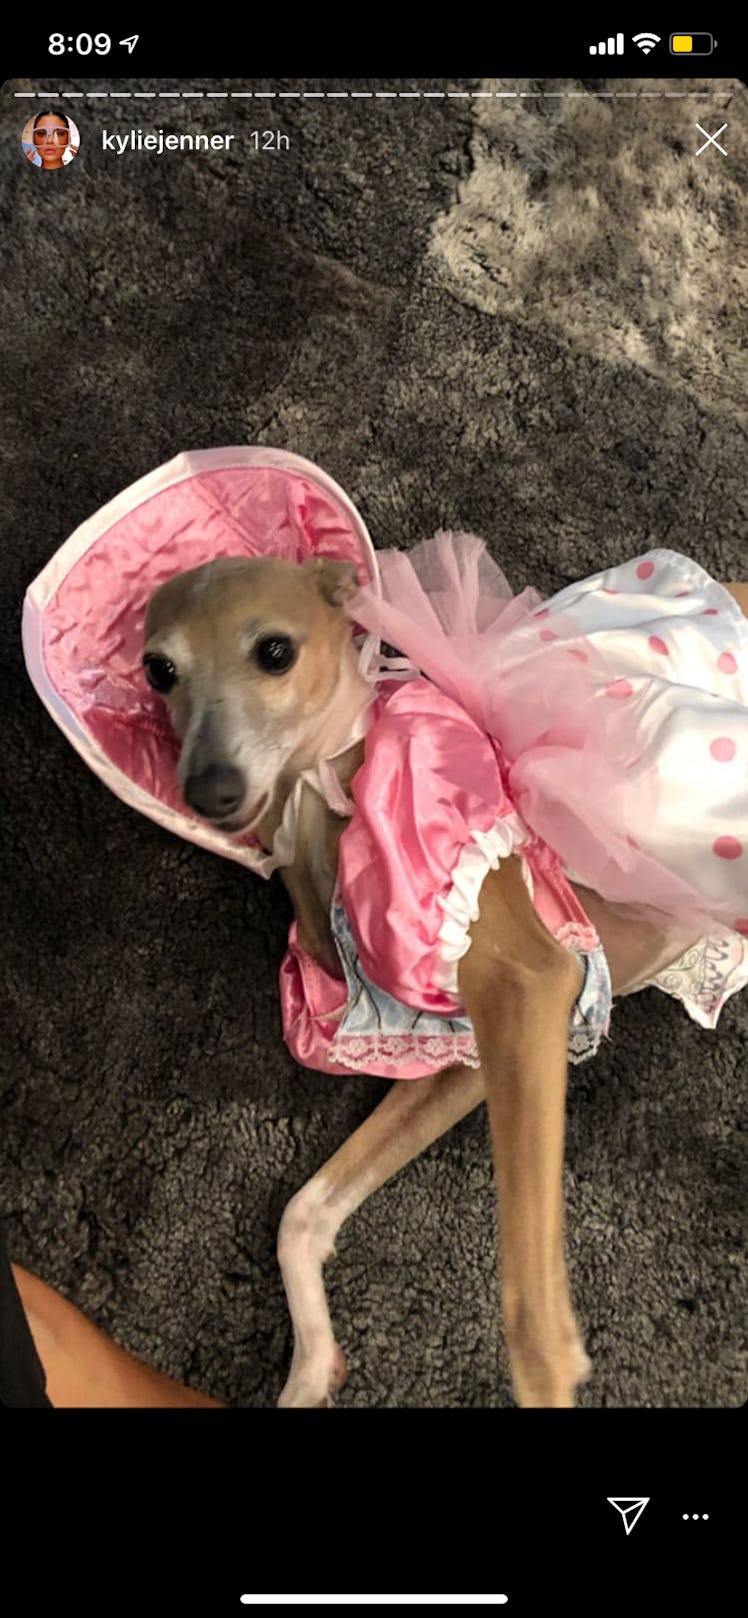 Kylie Jenner's dog dressed up as Bo Peep from 'Toy Story'